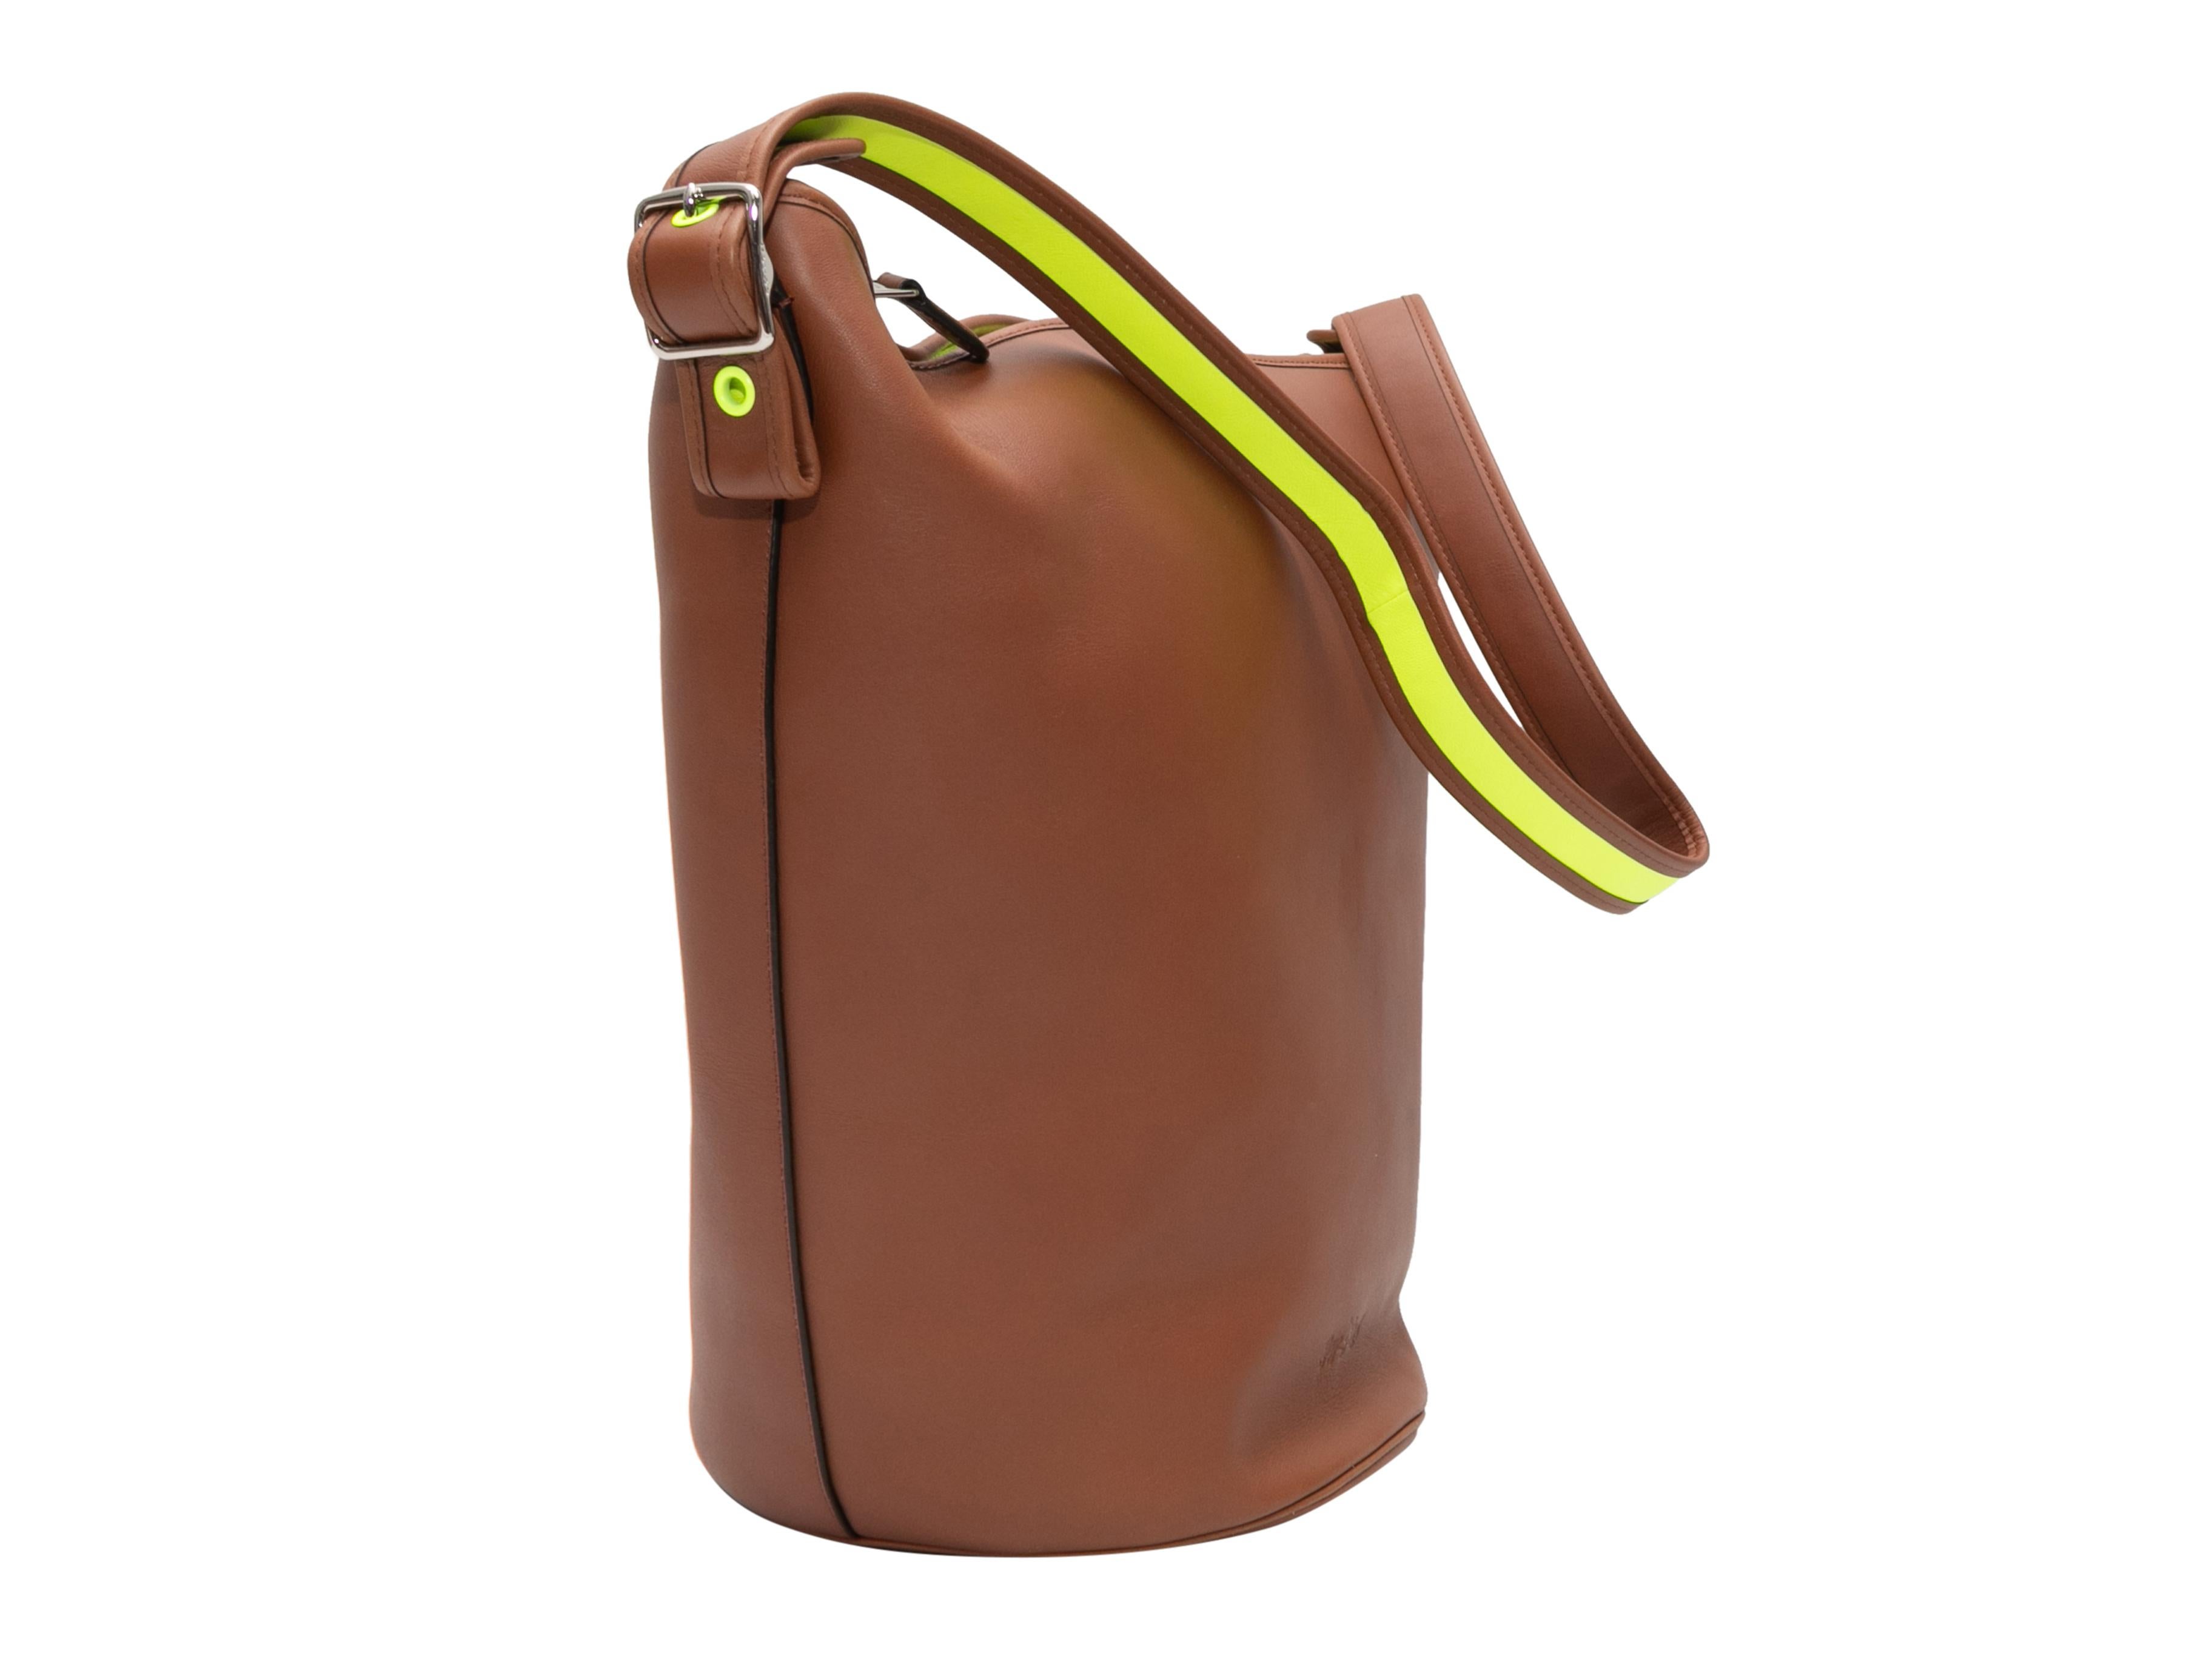 Brown Coach 2014 Duffle Sac Bag. The Duffle Sac Bag features a leather body, silver-tone hardware, neon green interior, a single flat shoulder strap, and a top zip closure. 14